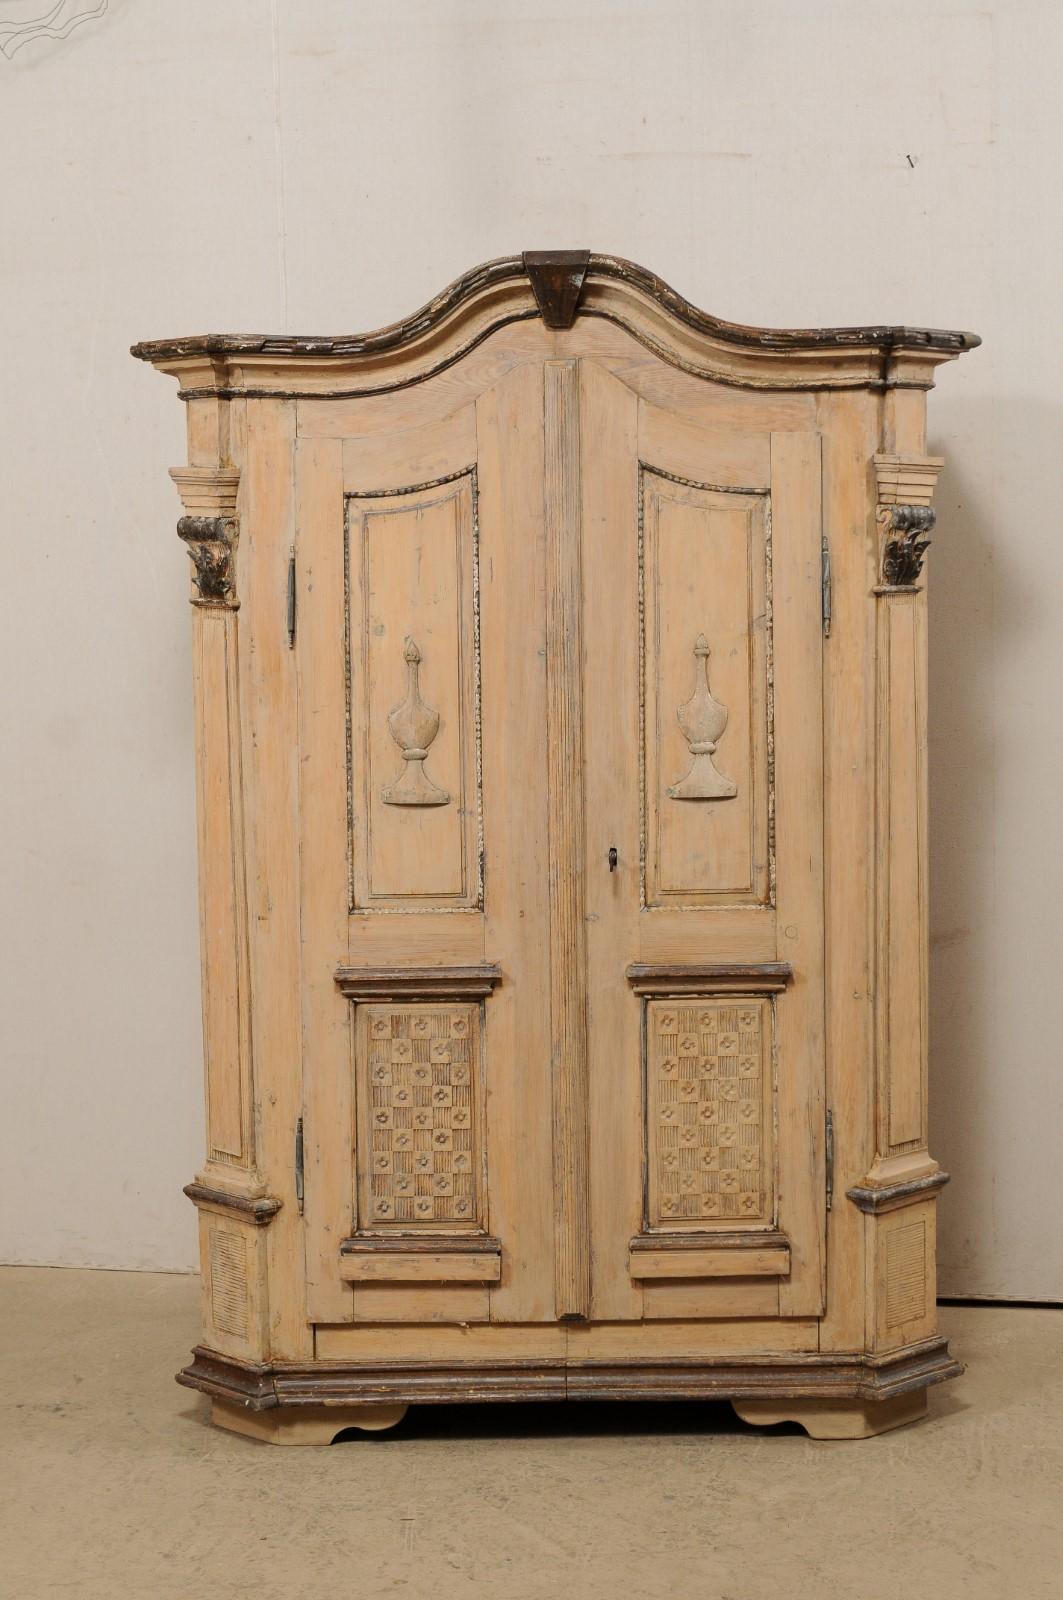 A German tall storage cabinet with nicely carved accents from the 19th century. This tall antique armoire cabinet from Germany features a molded and arched cornice, with carved ribbon trimming, atop a case which houses a pair of decoratively paneled